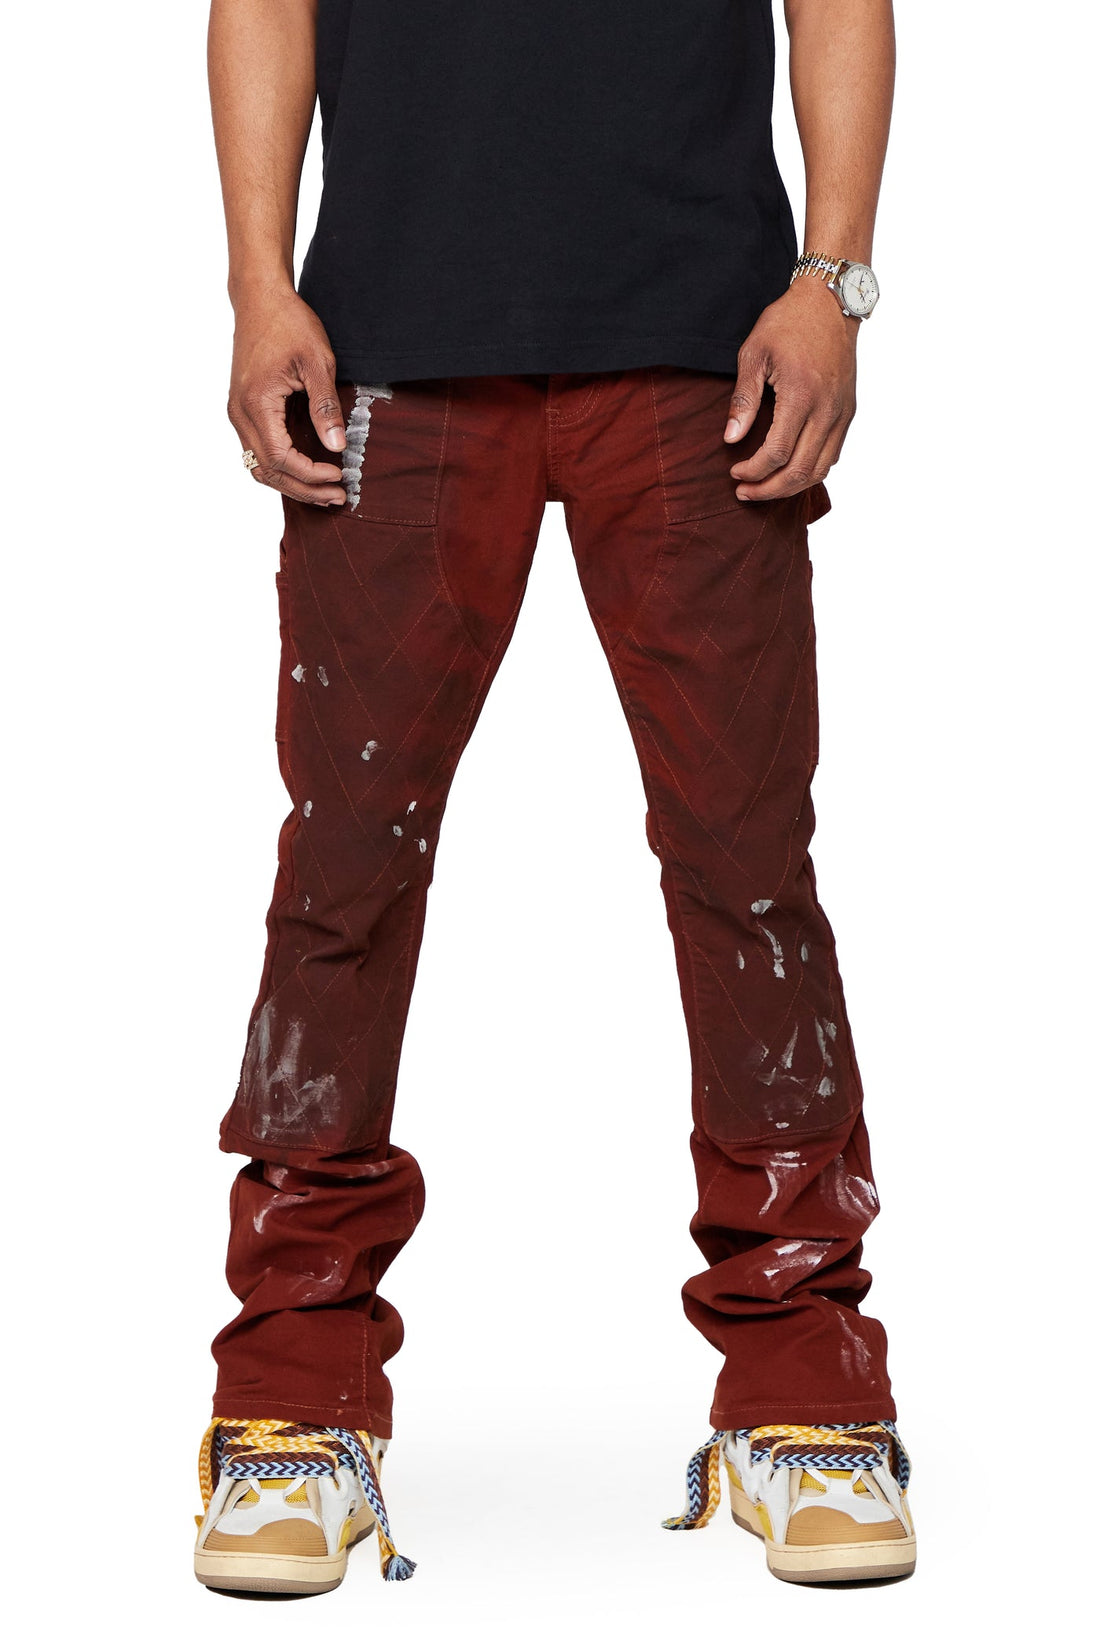 VALABASAS “DIrty Red Wine” JEANS